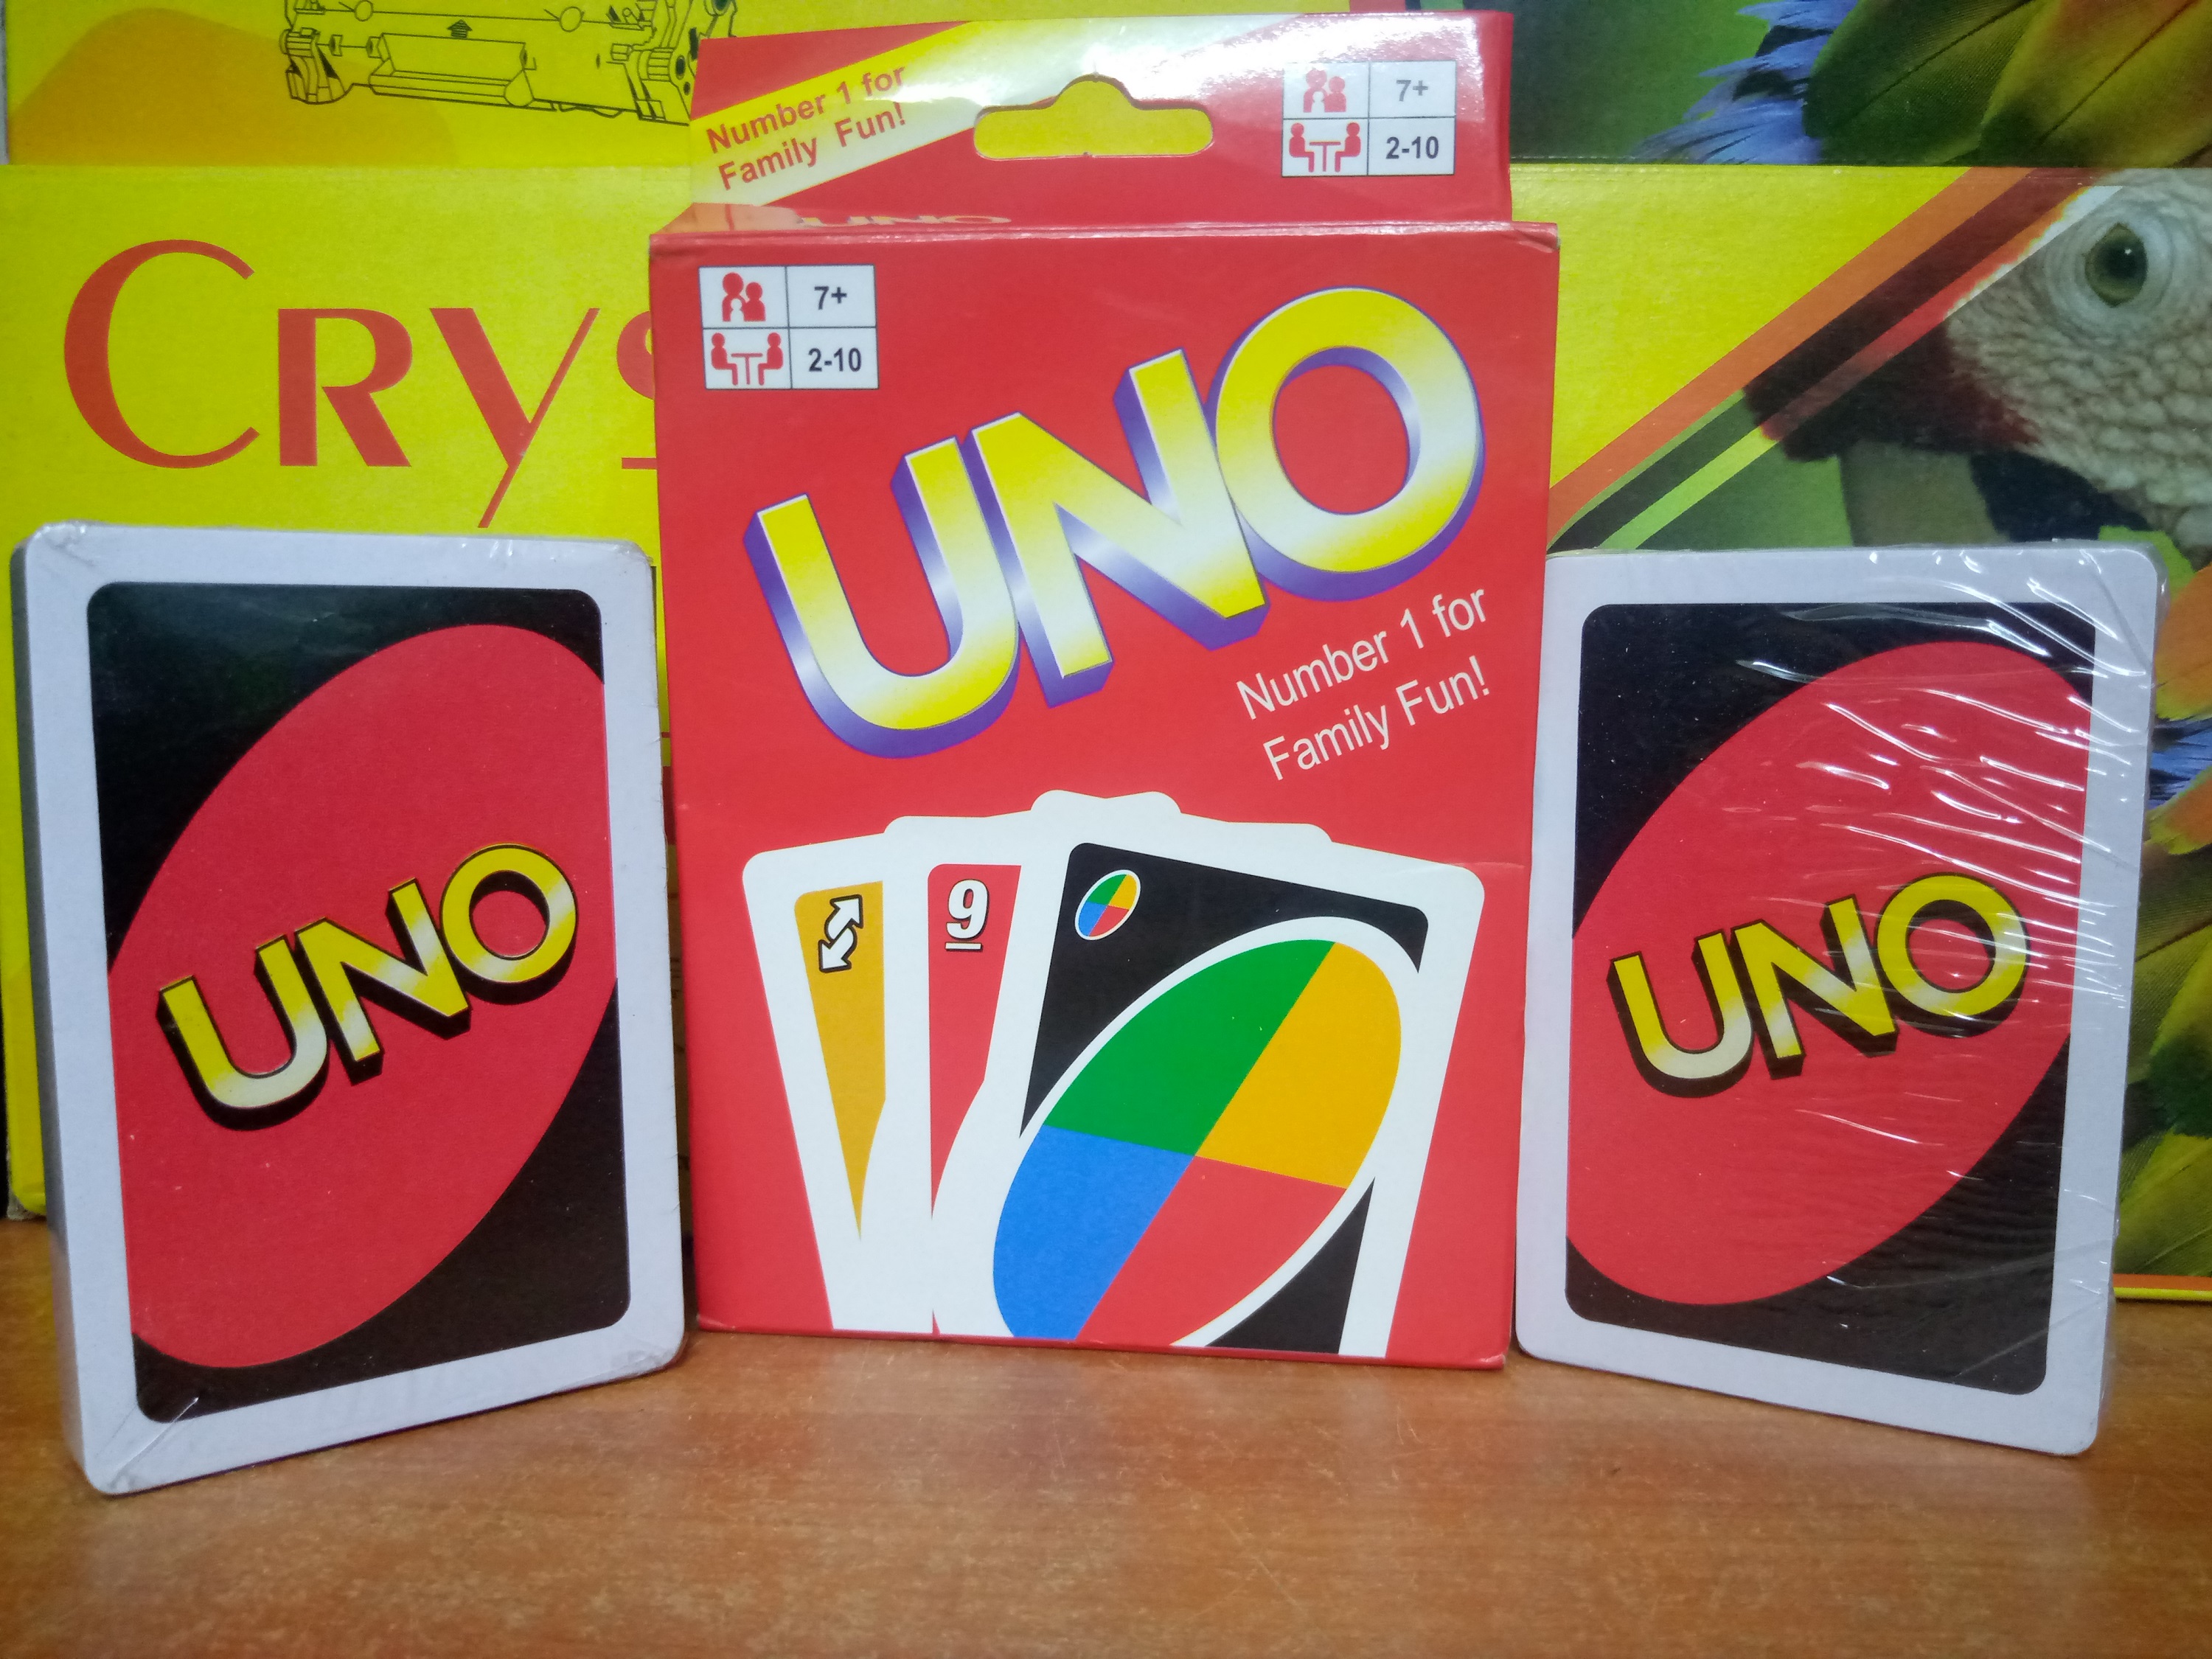 Uno Playing Card Game